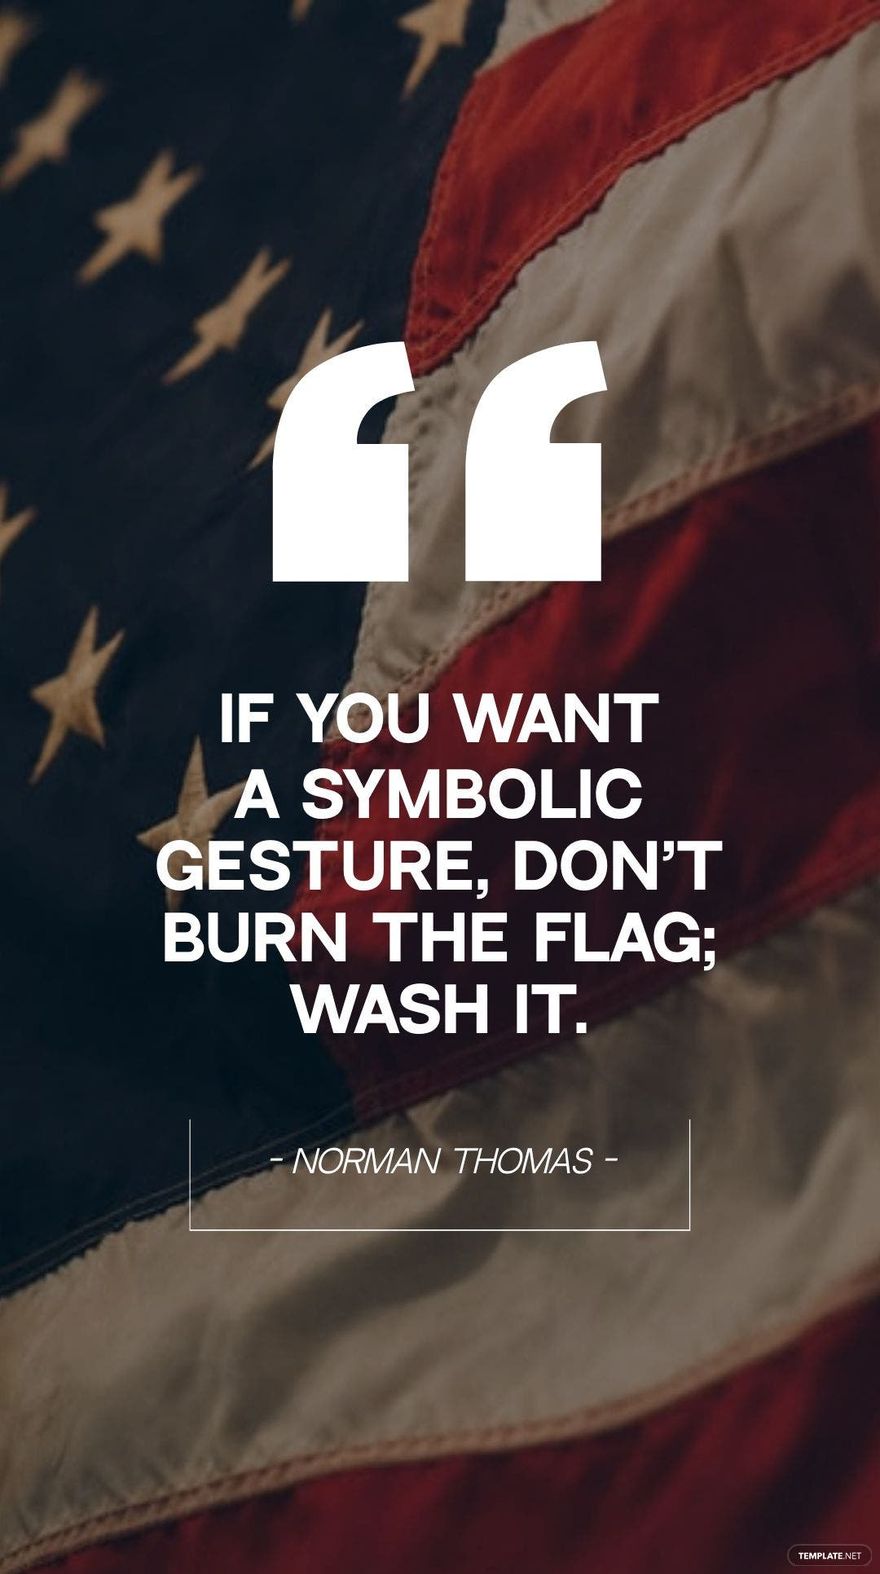 Norman Thomas - If you want a symbolic gesture, don’t burn the flag; wash it.